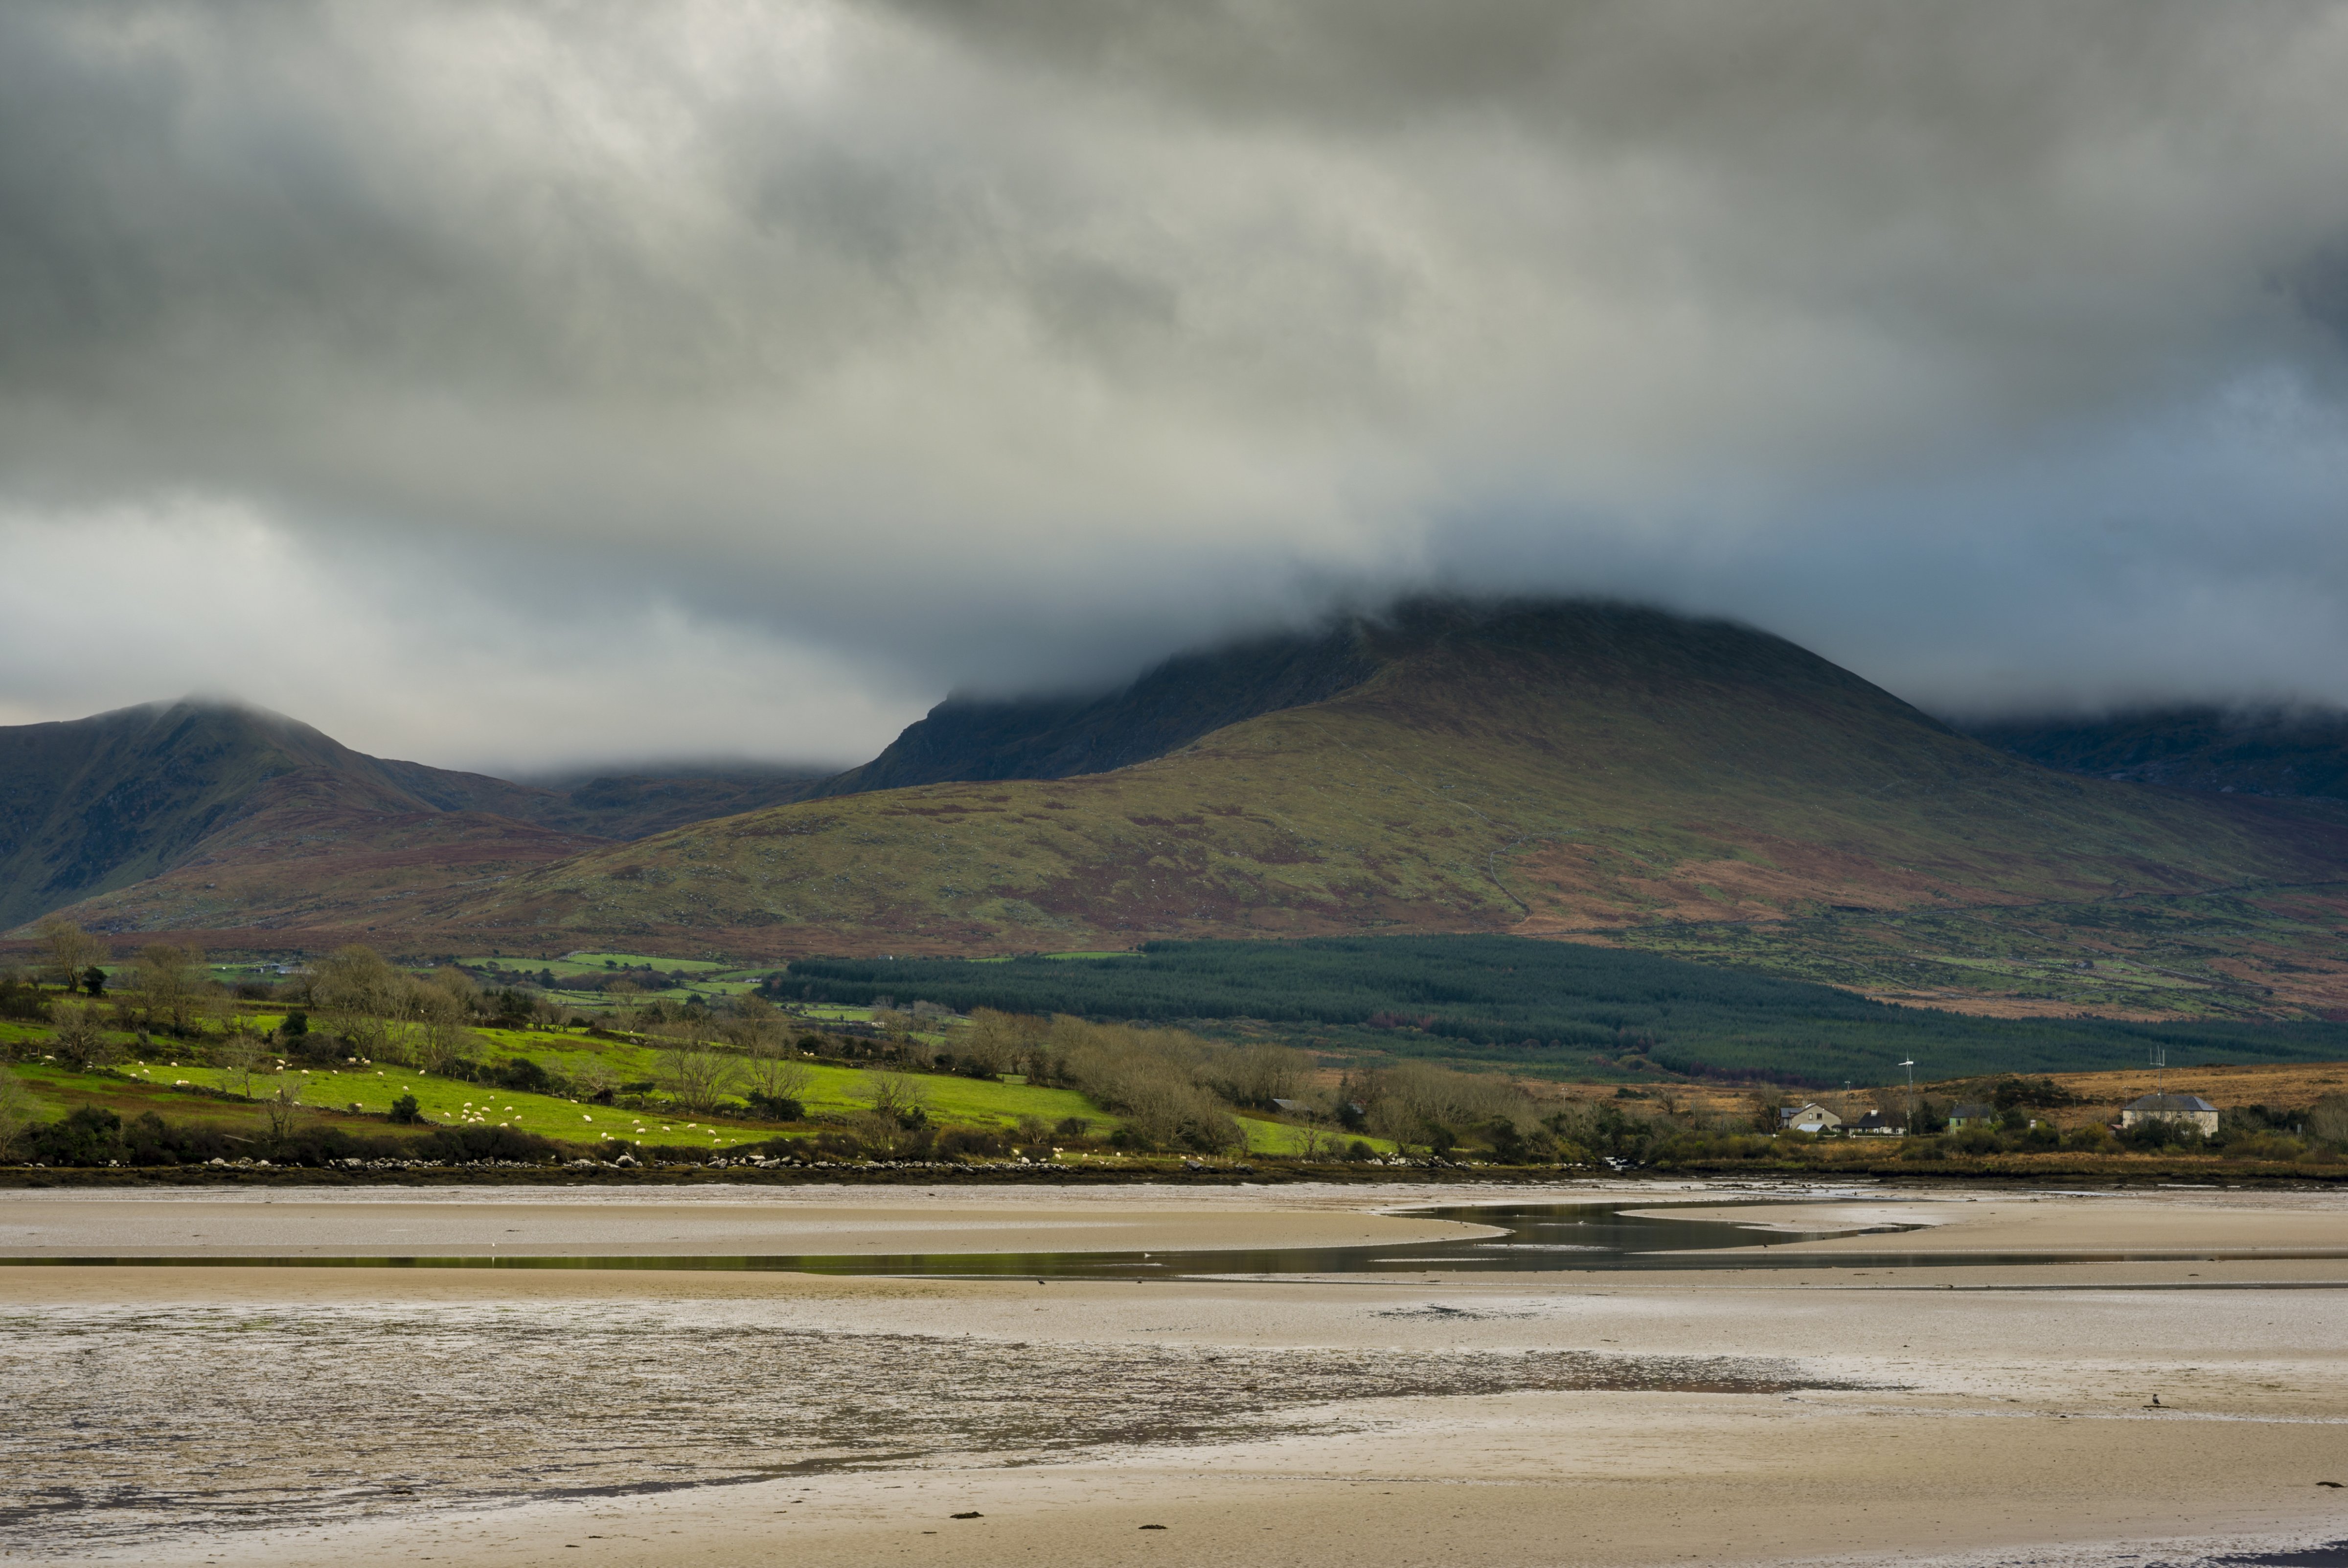 View of hills and beach at low tide, Drum West, Dingle Peninsula, County Kerry, Munster, Ireland, November (Robert Canis—Getty Images)